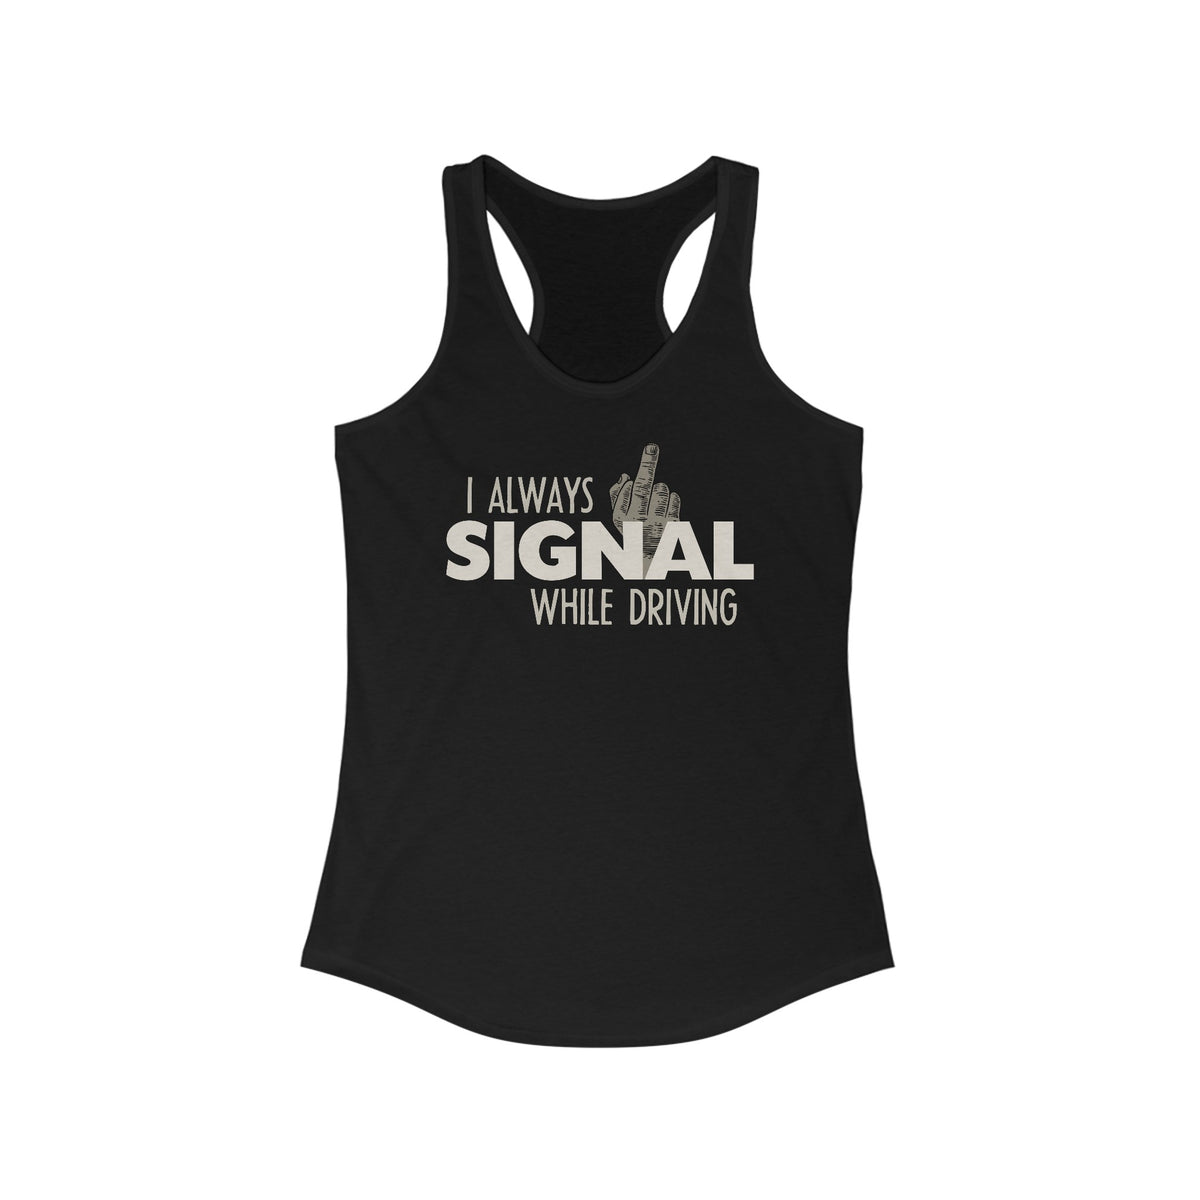 I Always Signal While Driving  - Women’s Racerback Tank